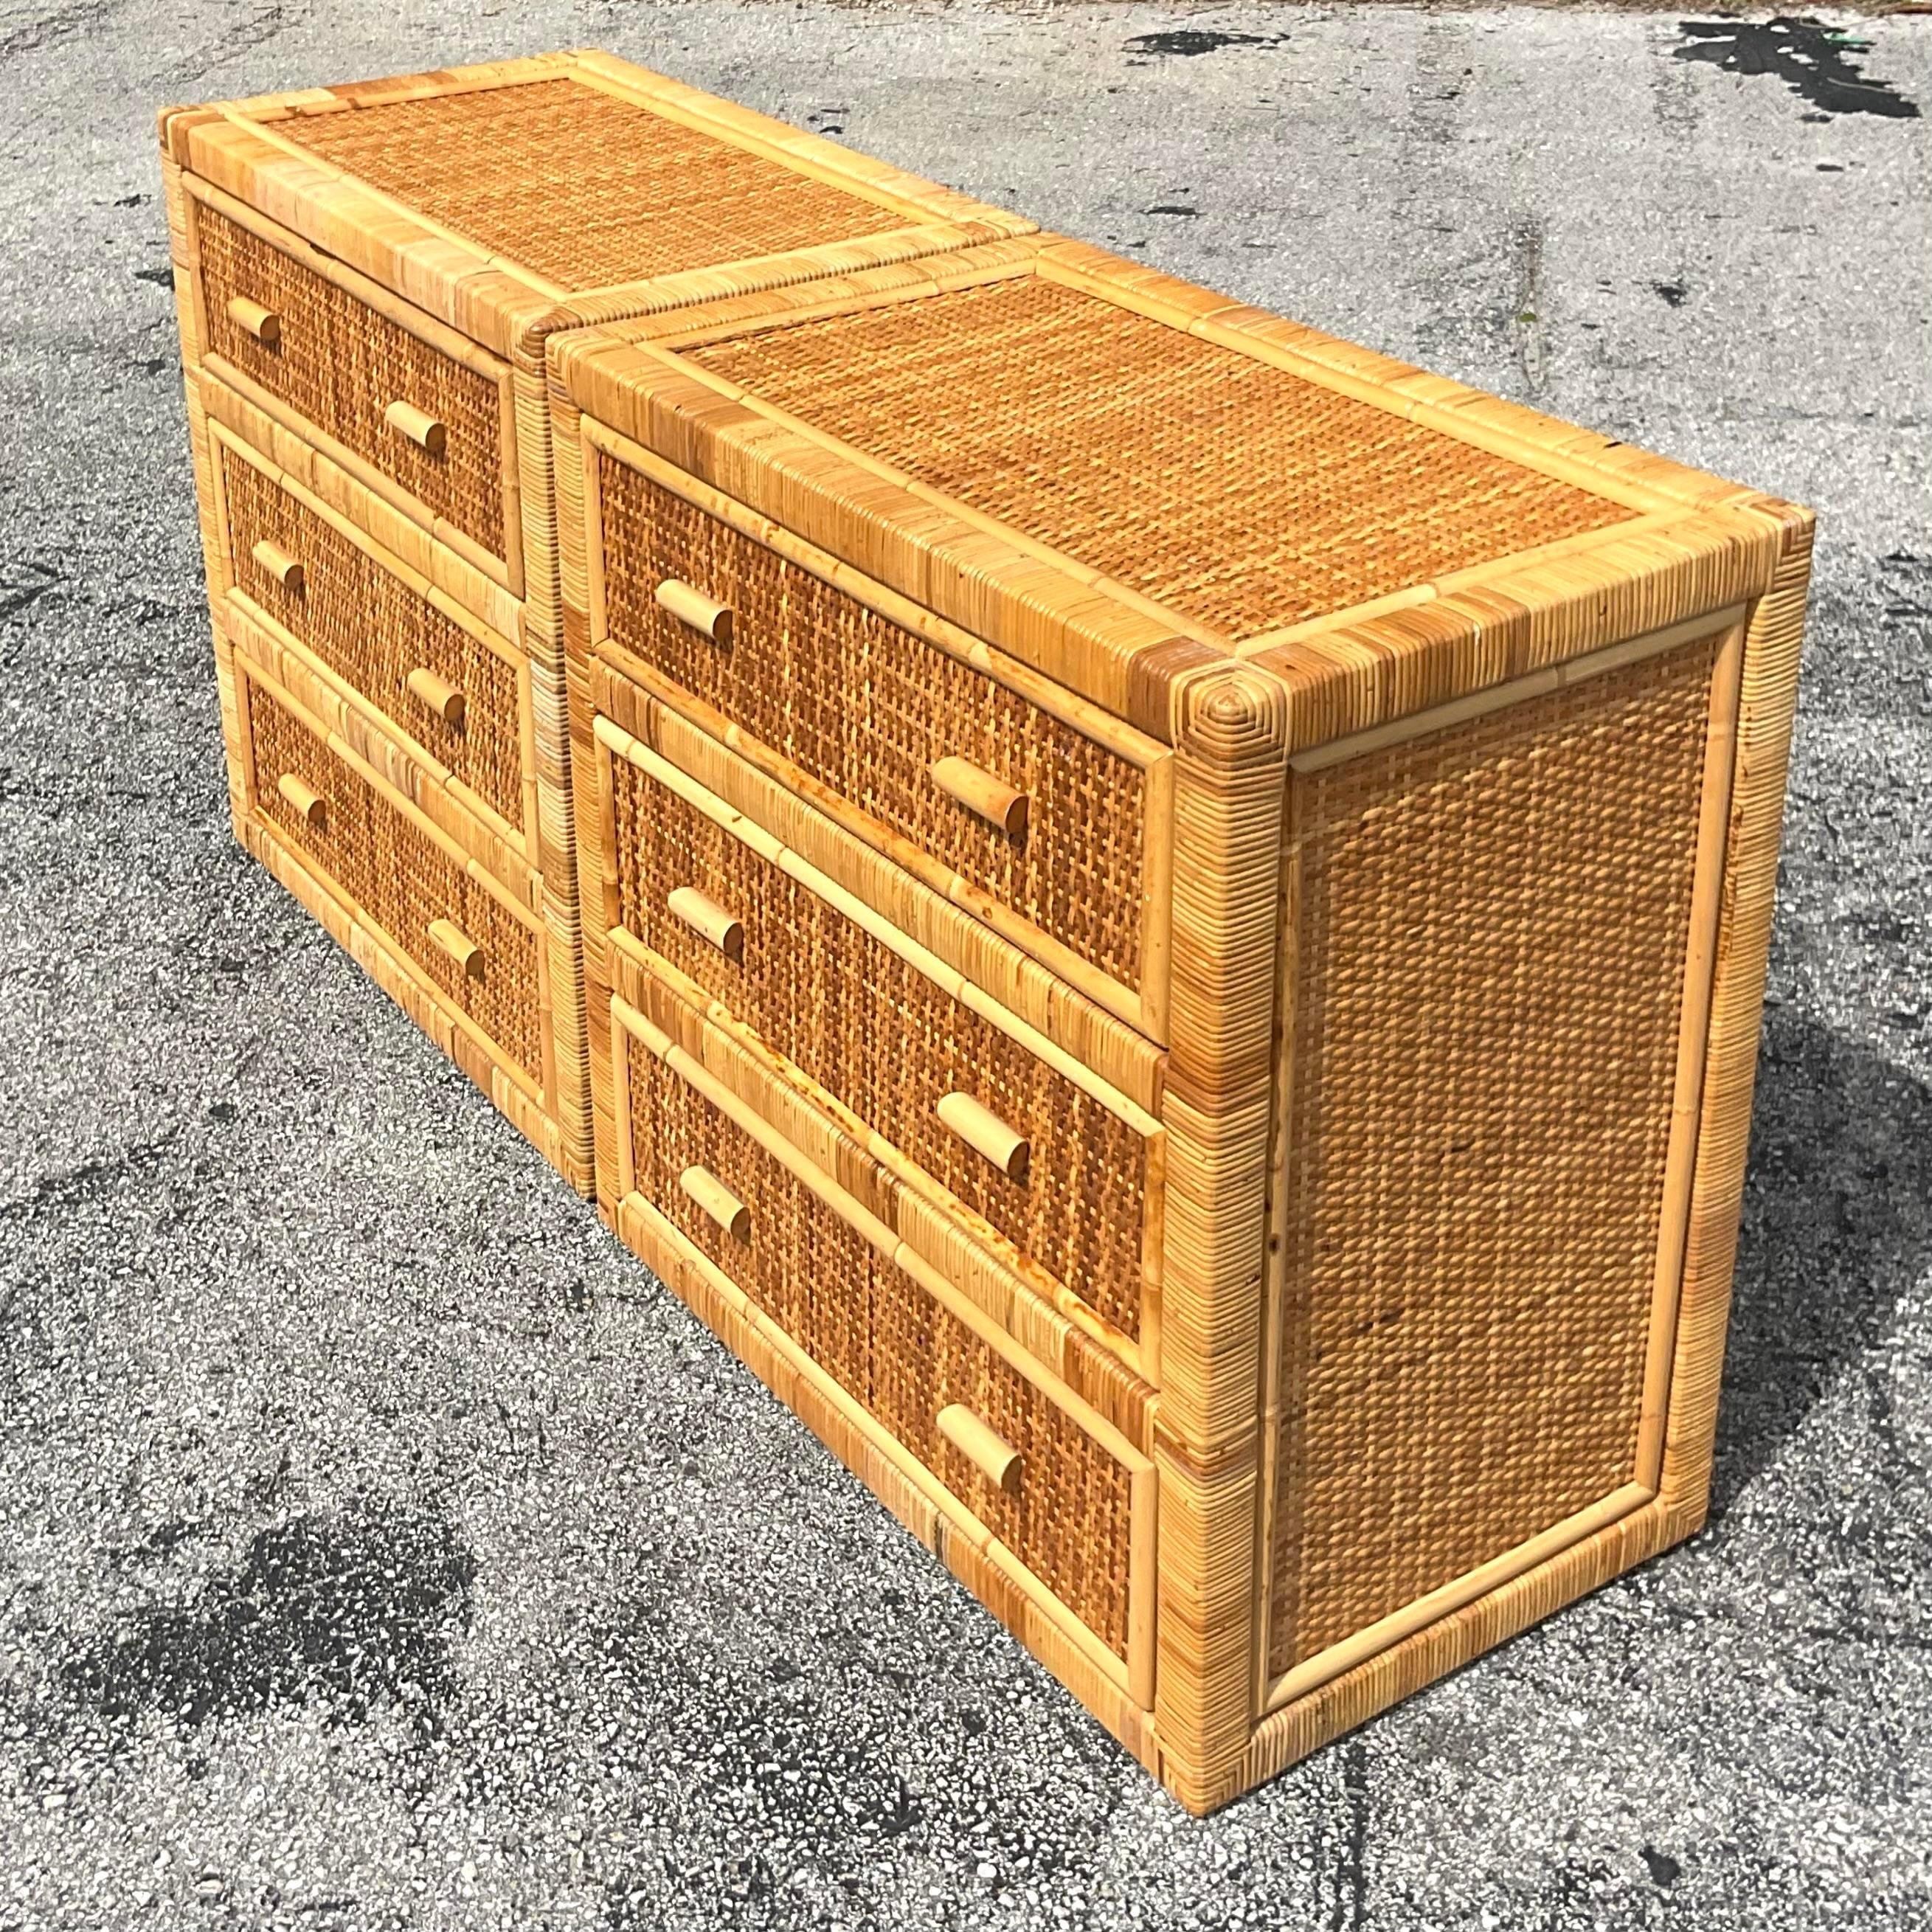 Crafted with timeless elegance, this pair of Vintage Coastal Wrapped Rattan Chests brings a touch of classic Americana to your home decor. Embodying coastal charm and practicality, these drawers exude warmth and style, offering both storage